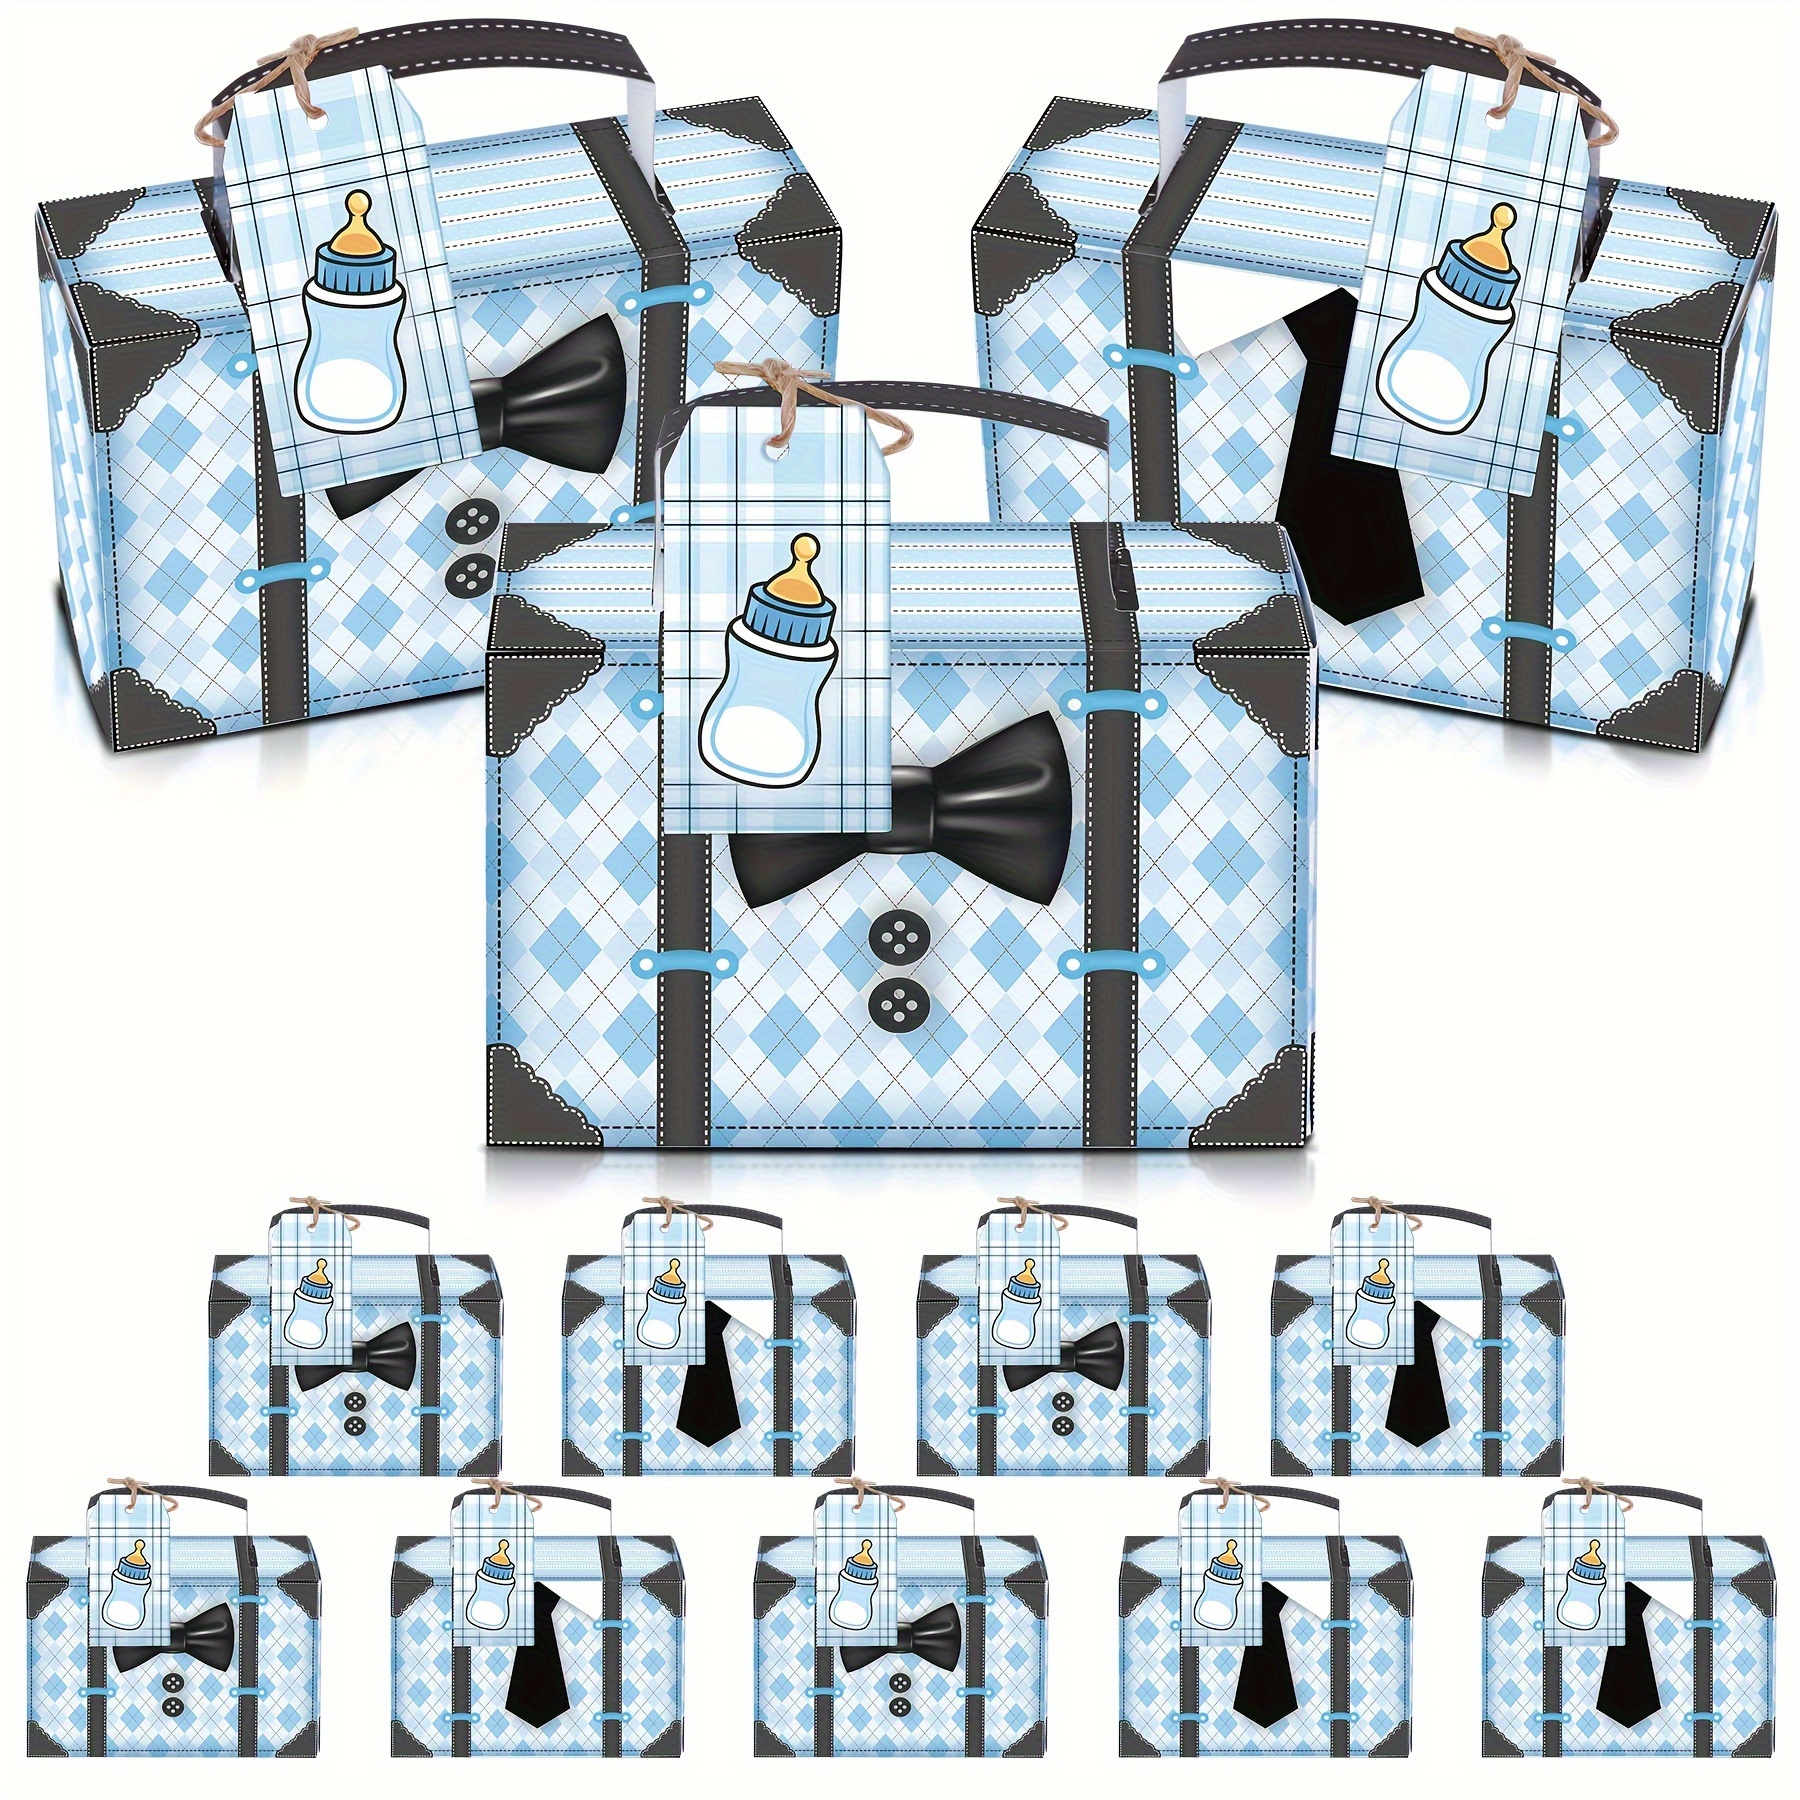 

12pcs/set, Mini Boy Boss Theme Party Favor Suitcase Goodie Boxes With Feeding Bottle Gift Tag Cards, Blue Black Little Gentleman Luggage Candy Treat Boxes For Birthday, Baby Shower, Gender Reveal